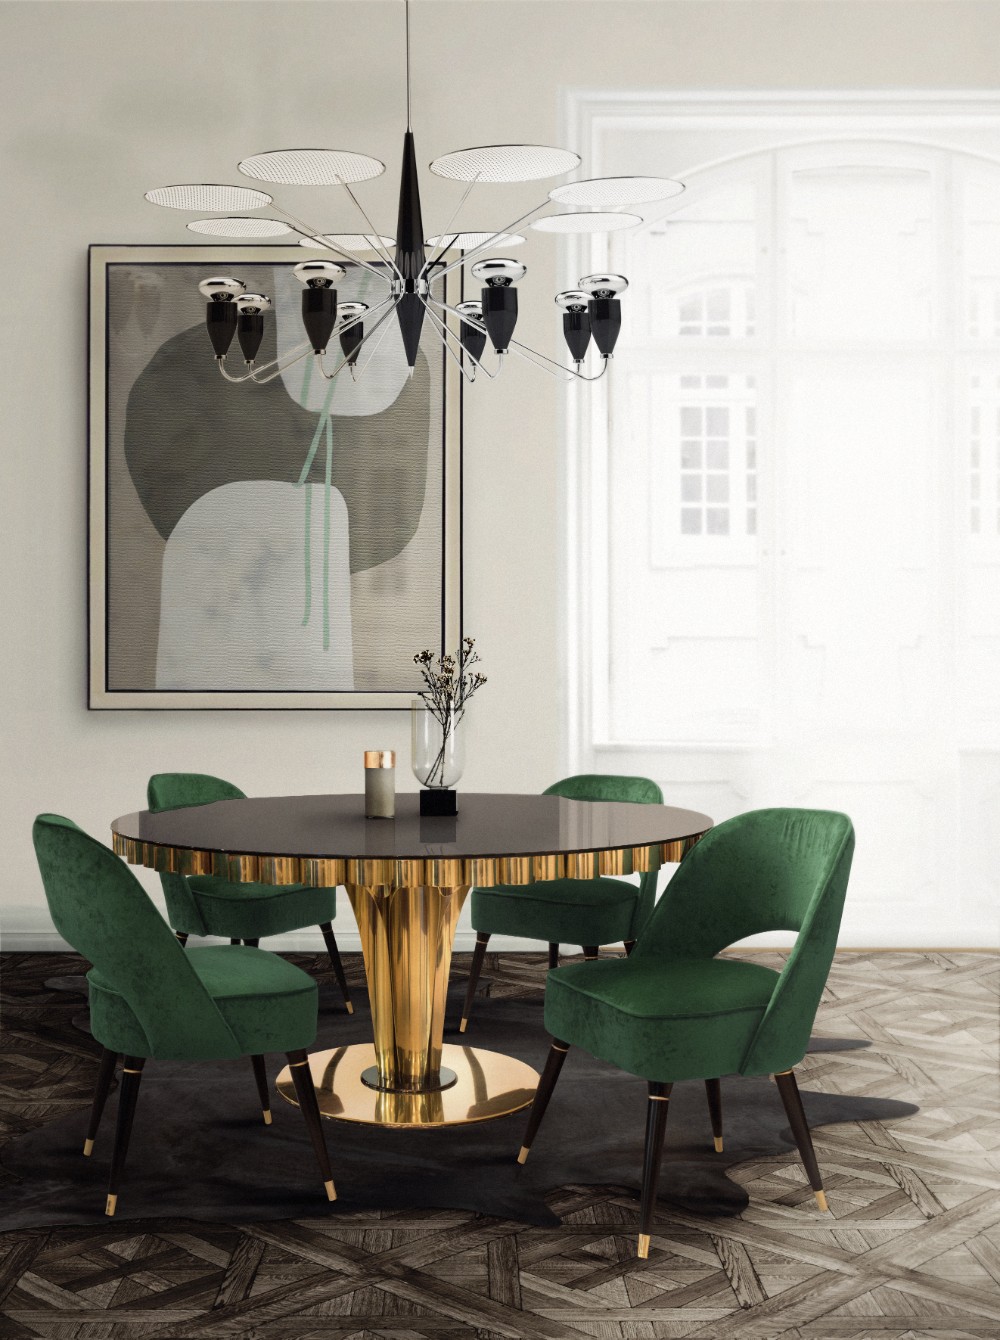 2018 Color Trends- Rocking a Green Decor in Your Mid-Century Home